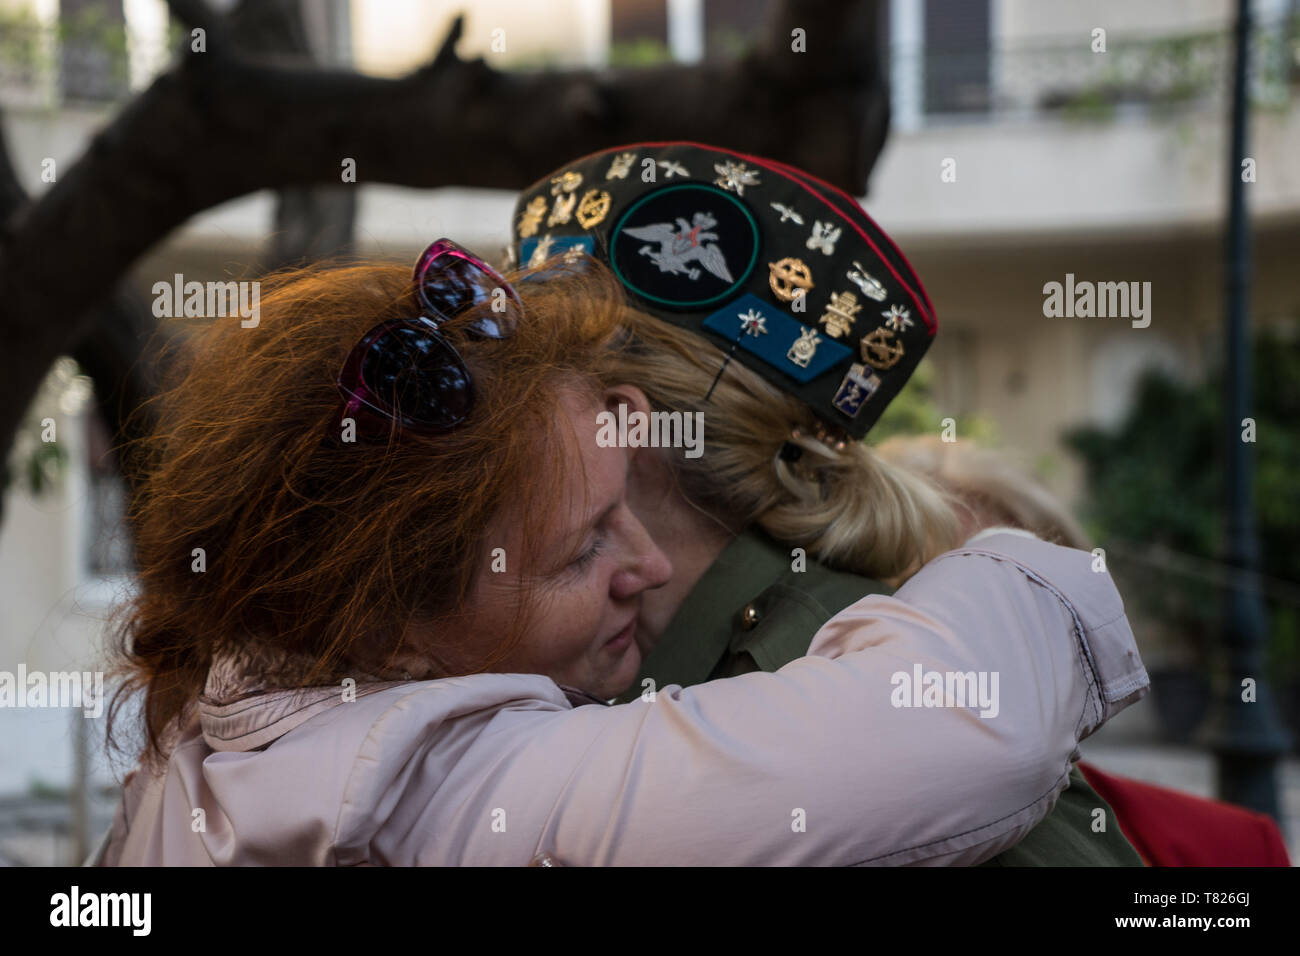 Two women seen hugging during the celebration. Participants celebrated the 74th anniversary for the victory over the Nazis by USSR in World War II by taking part in an Immortal Battalion march. Participants paraded with pictures of their relatives who lost their life in the war to honour them. Stock Photo